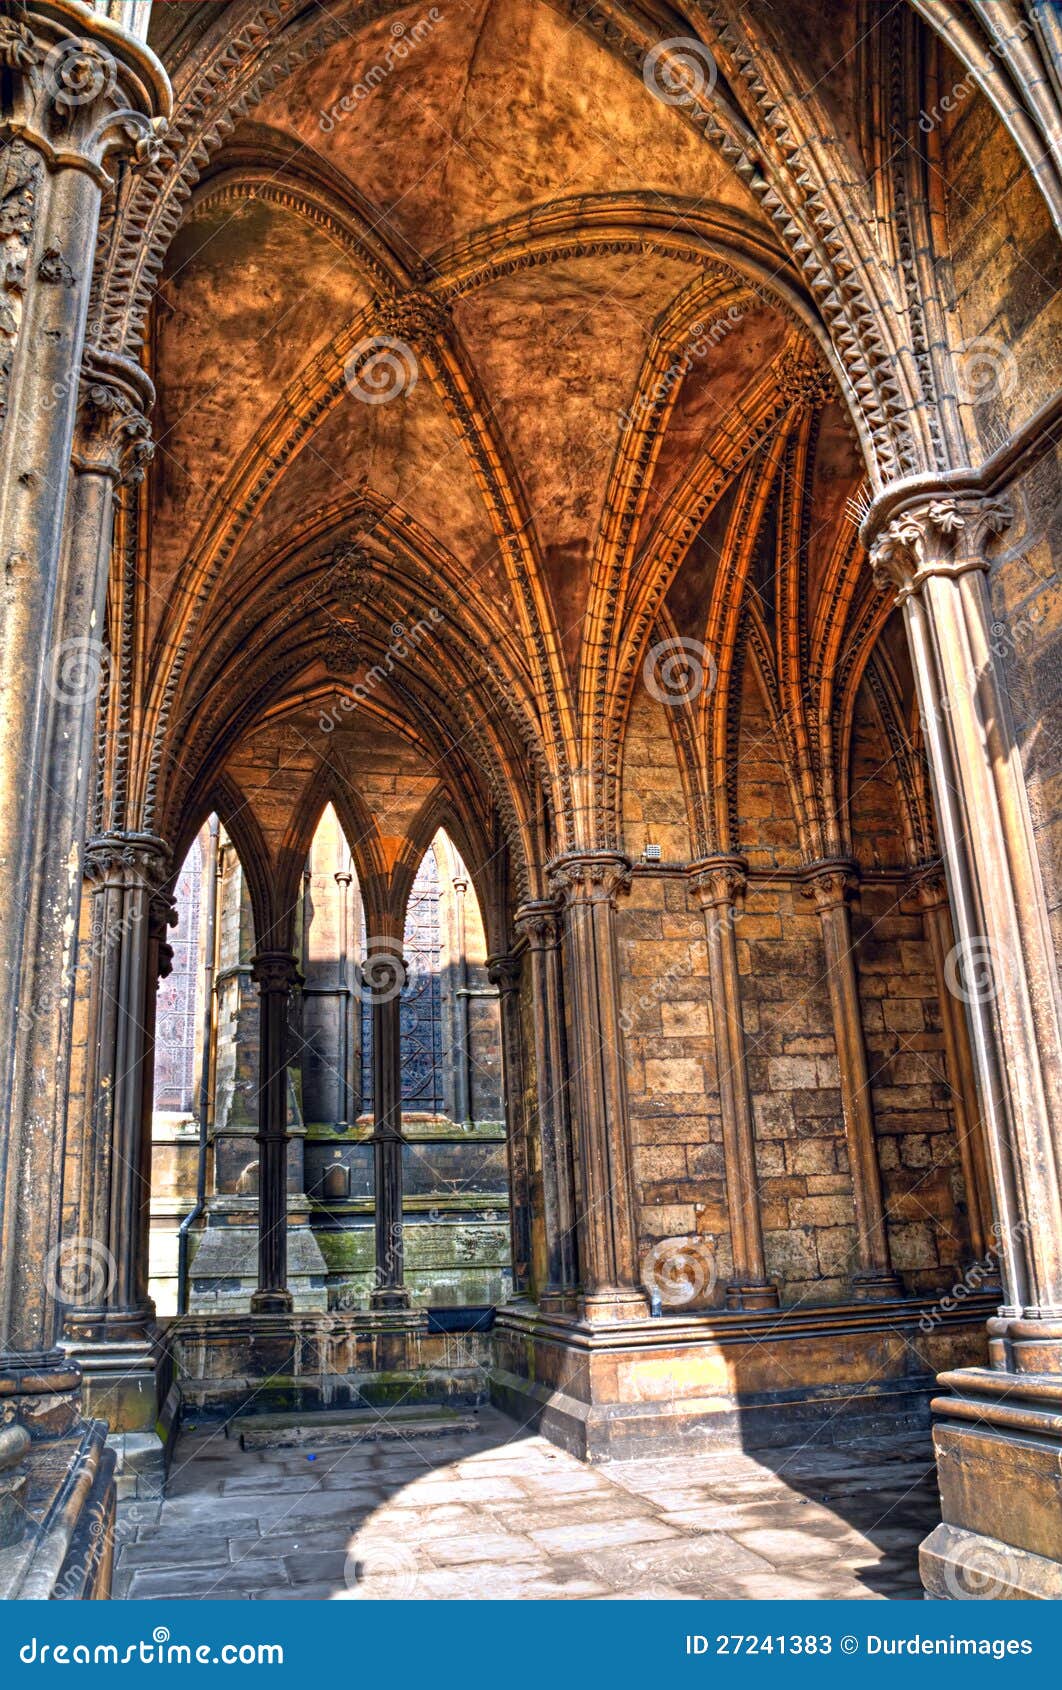 vaulted cloister, lincoln cathedral, england